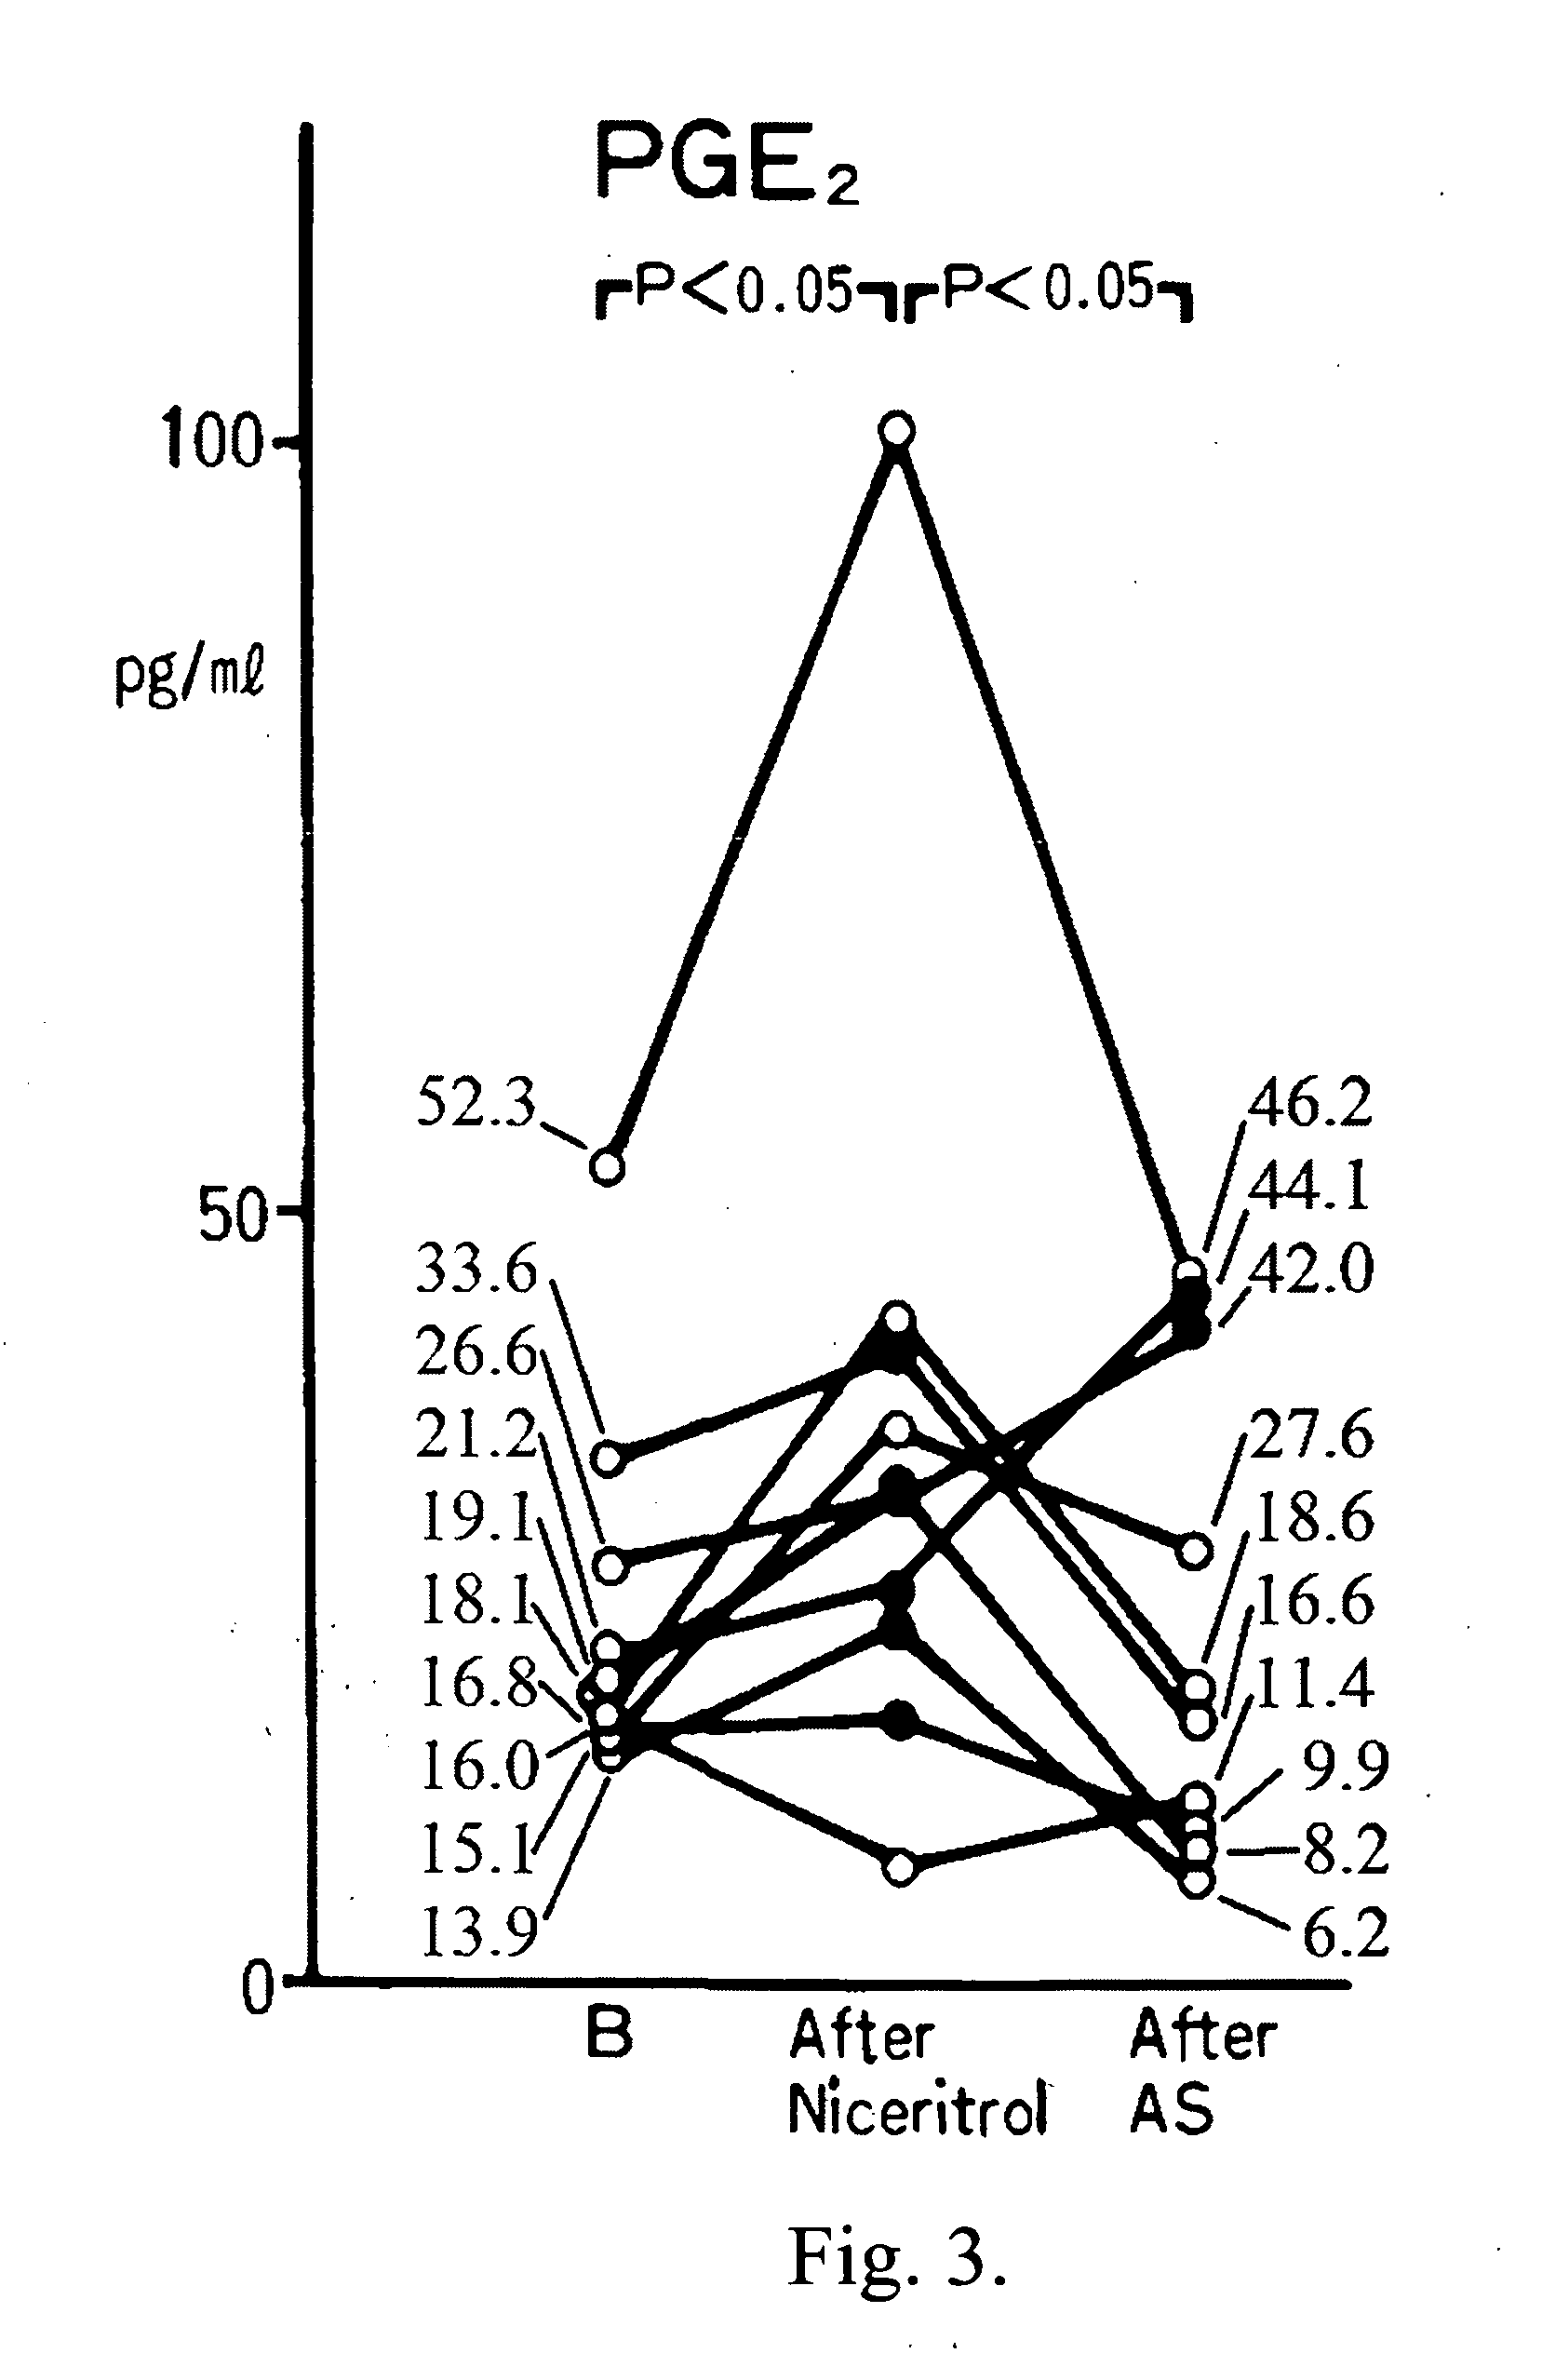 Method for mitigating of Prostaglandin E2 reducing side effects of non-steroidal anti-inflammatory drugs